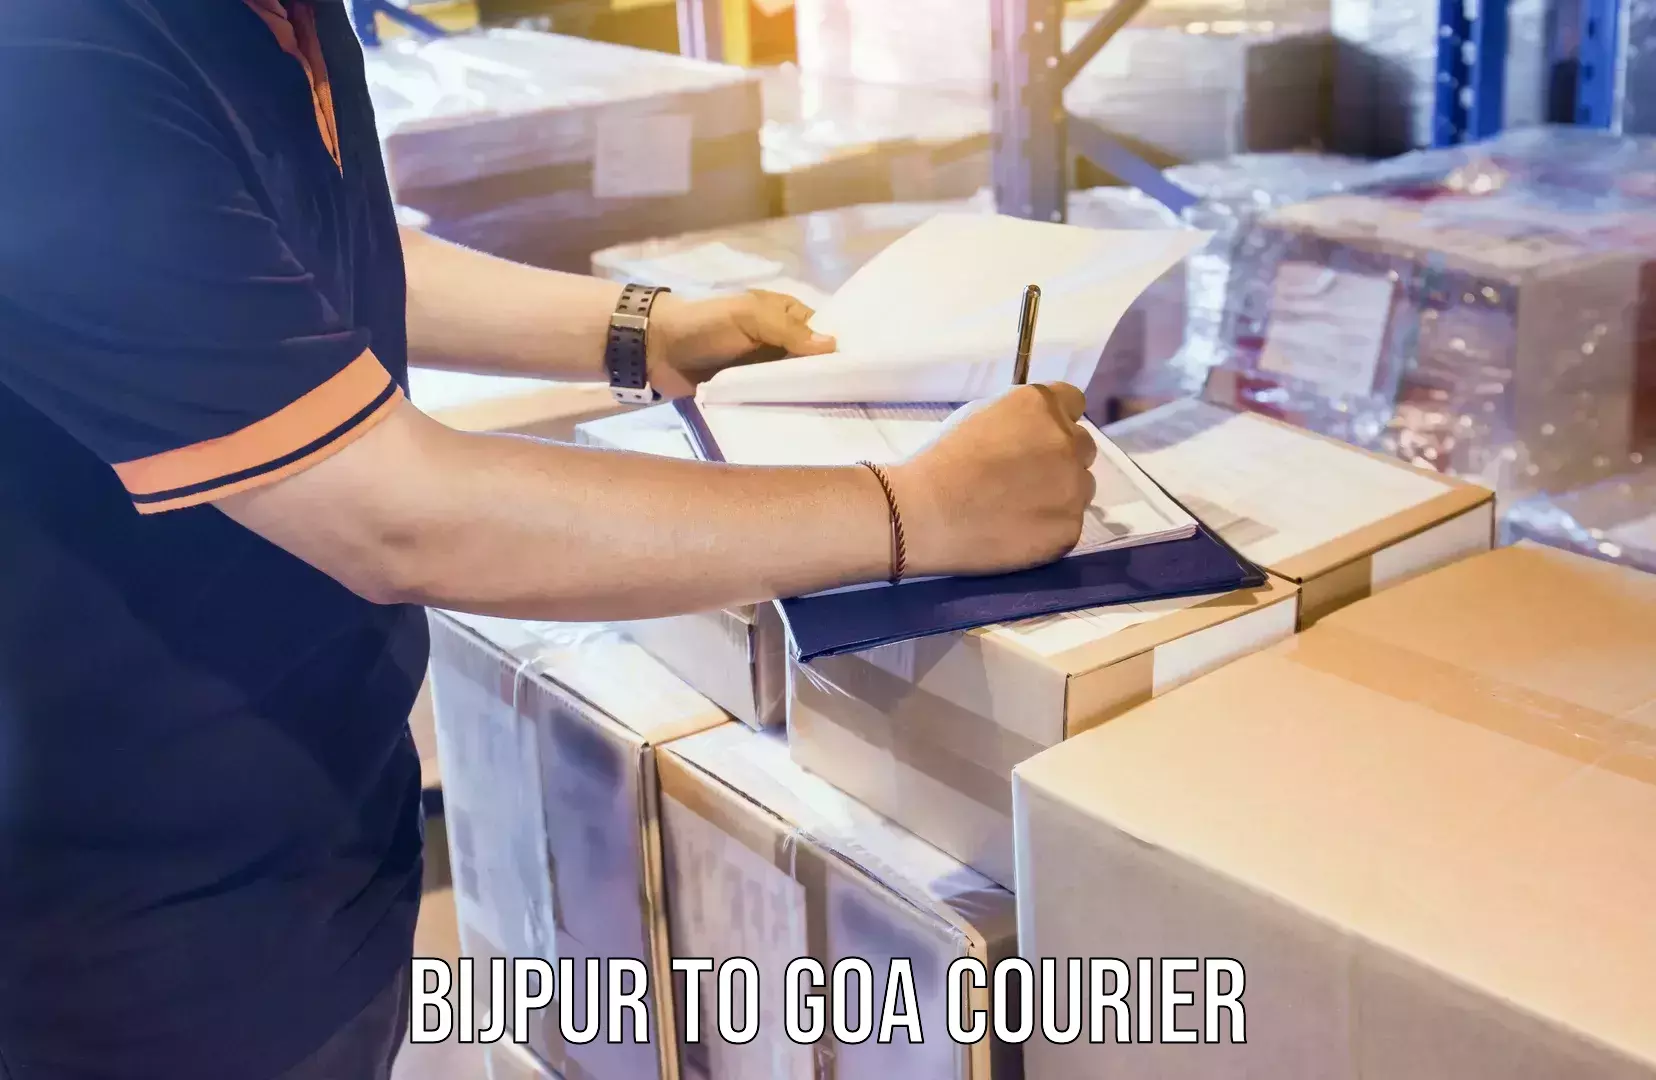 Courier service innovation Bijpur to Goa